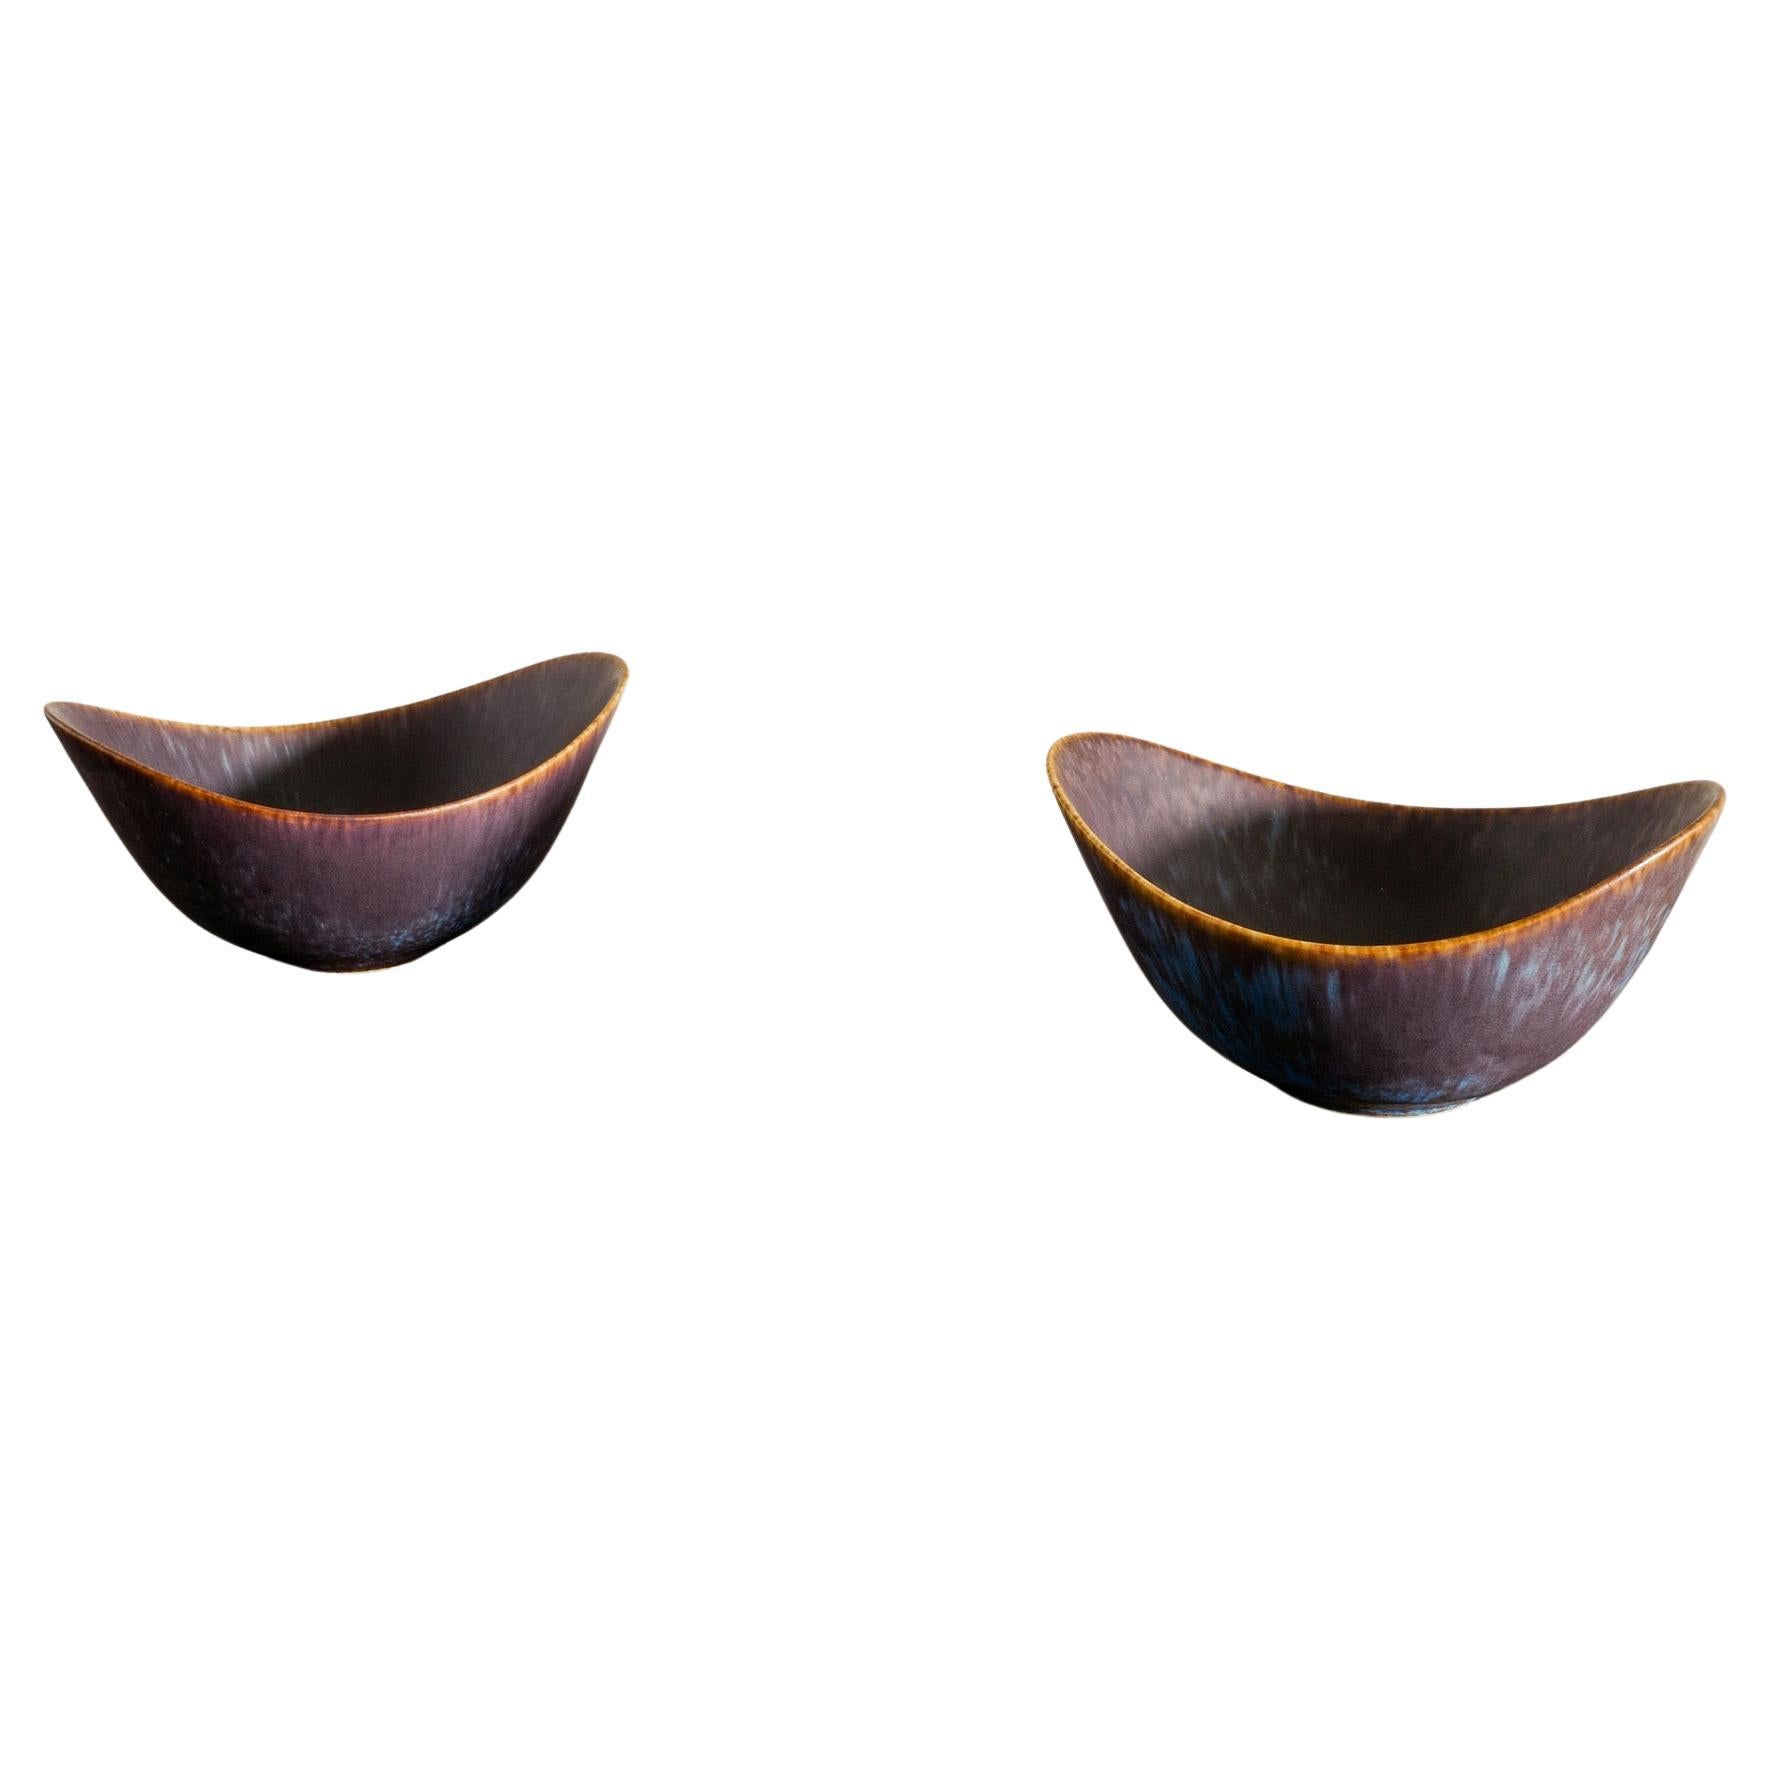 Pair of Mid Century Ceramic Bowls by Gunnar Nylund for Rörstrand Sweden, 1950s